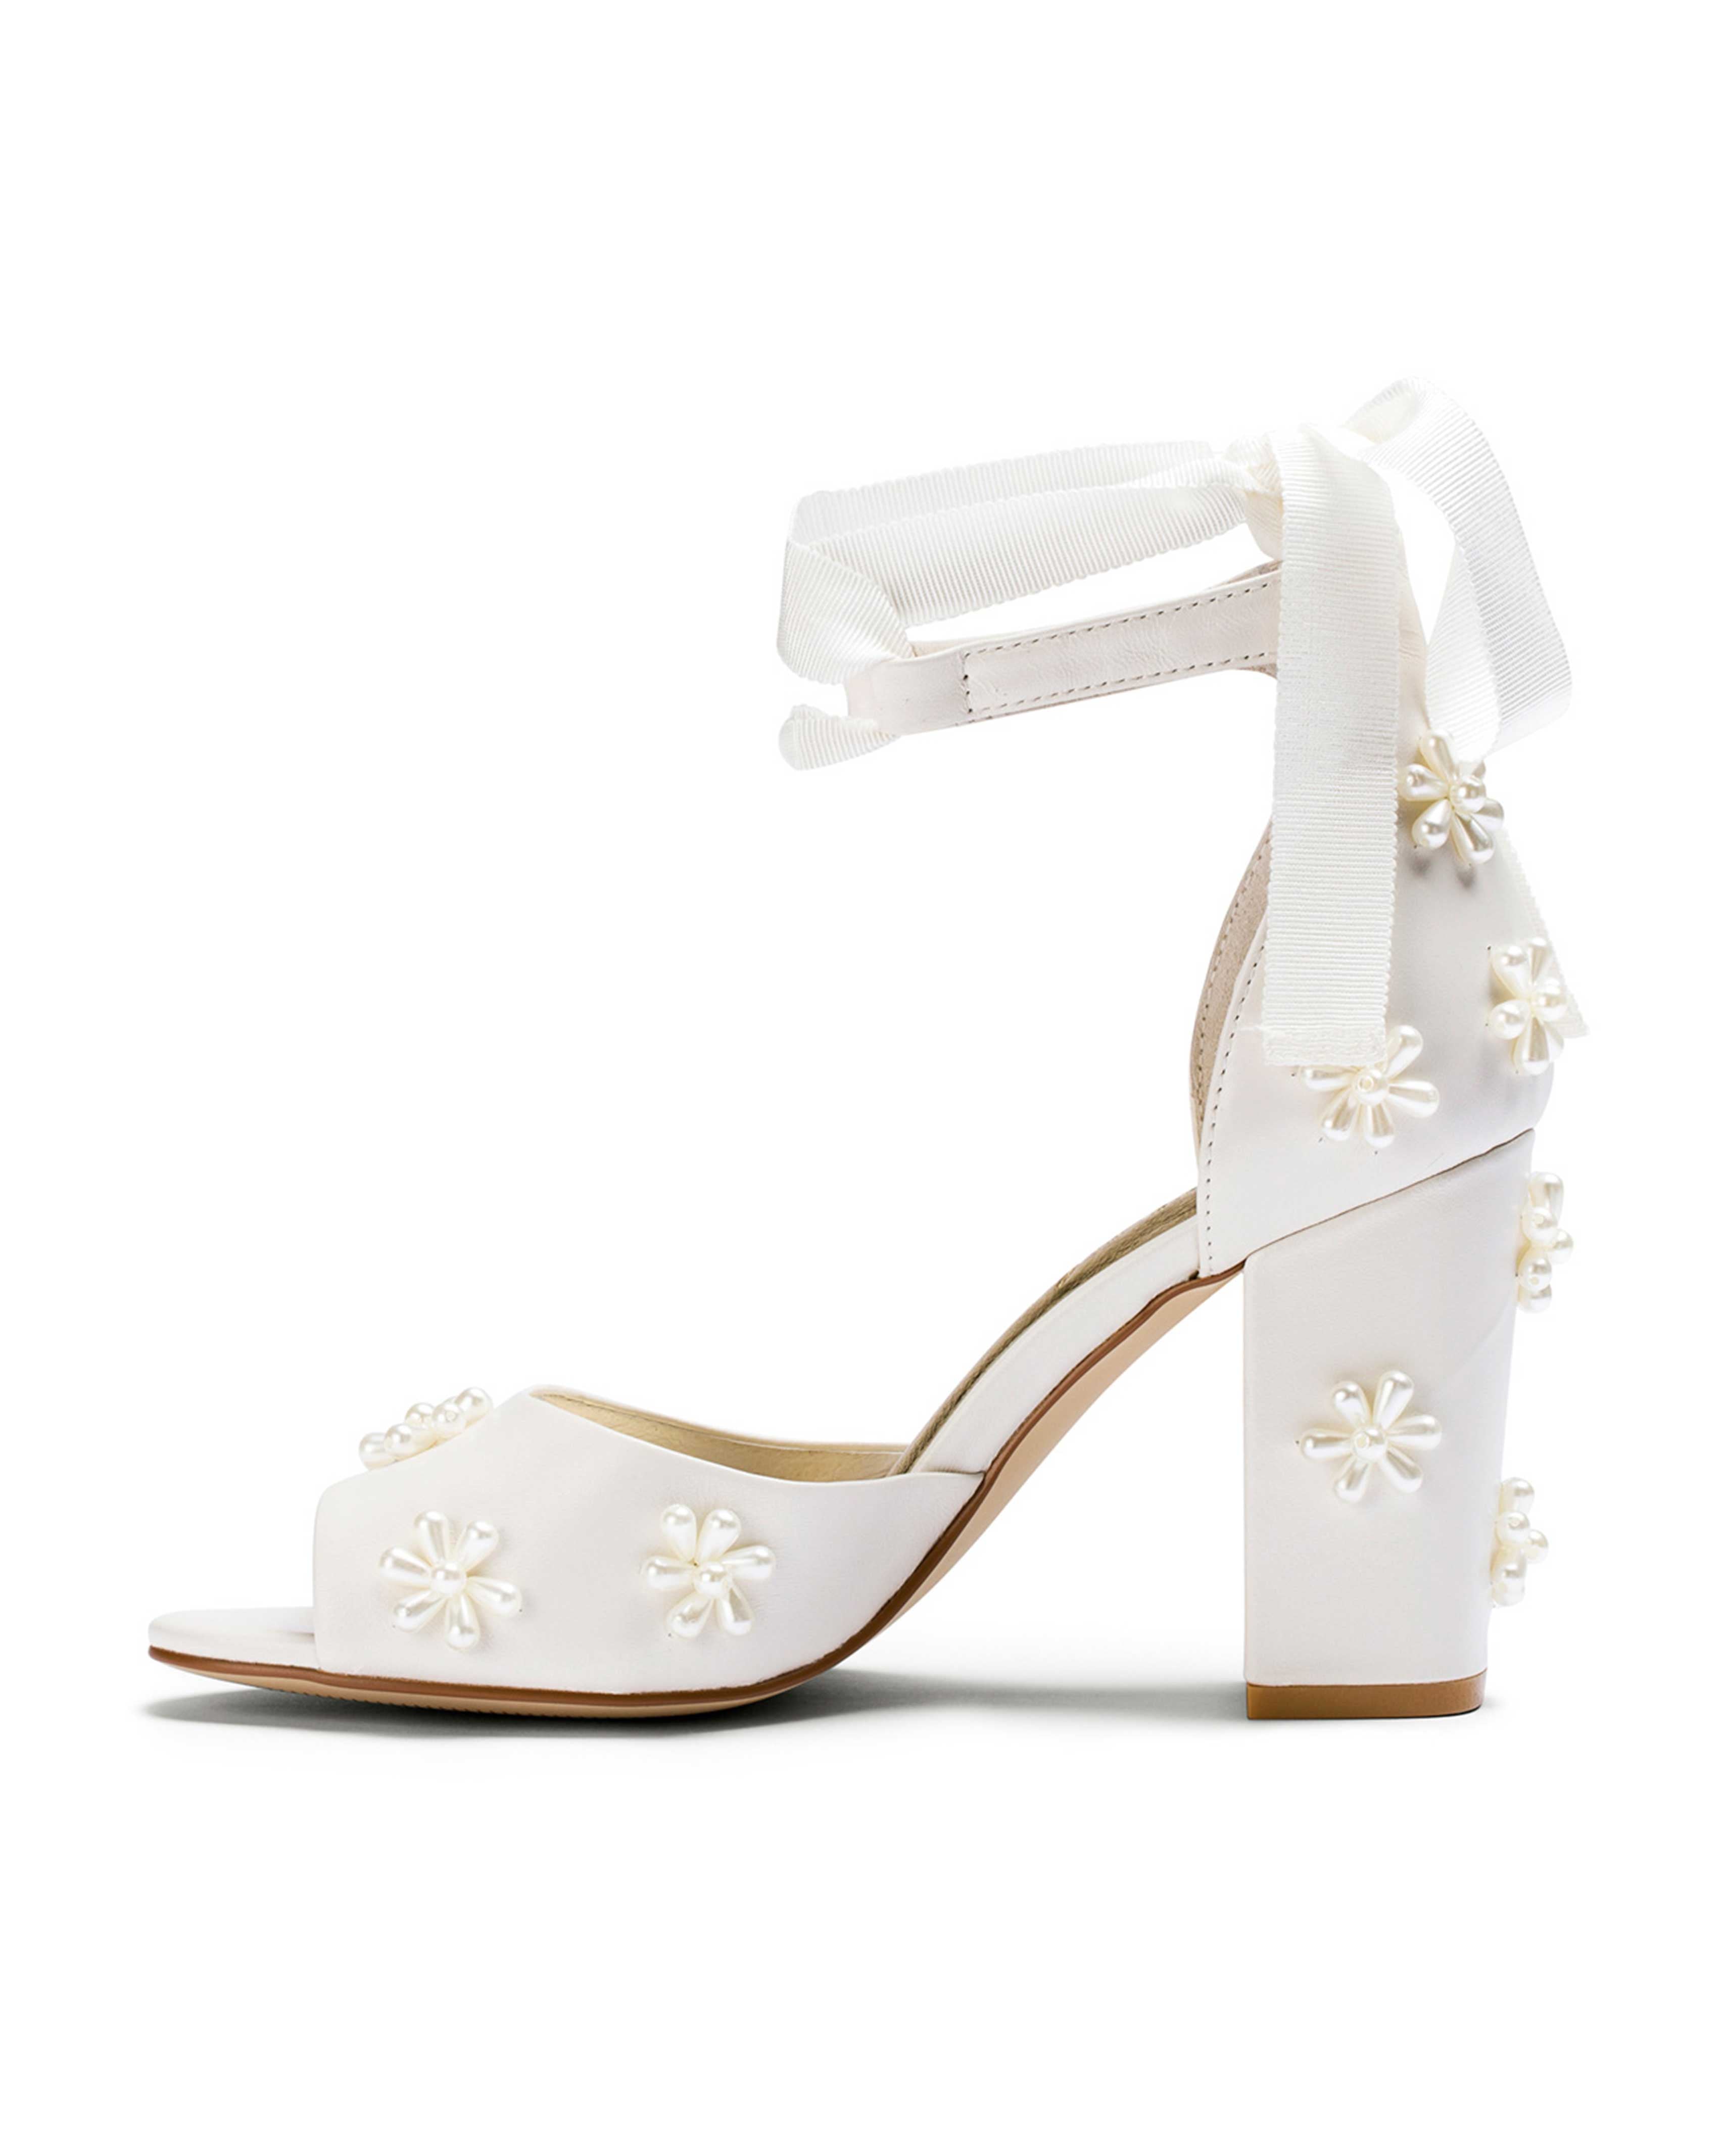 Pearl flower wedding shoes with block heel for bridal shoes on wedding day